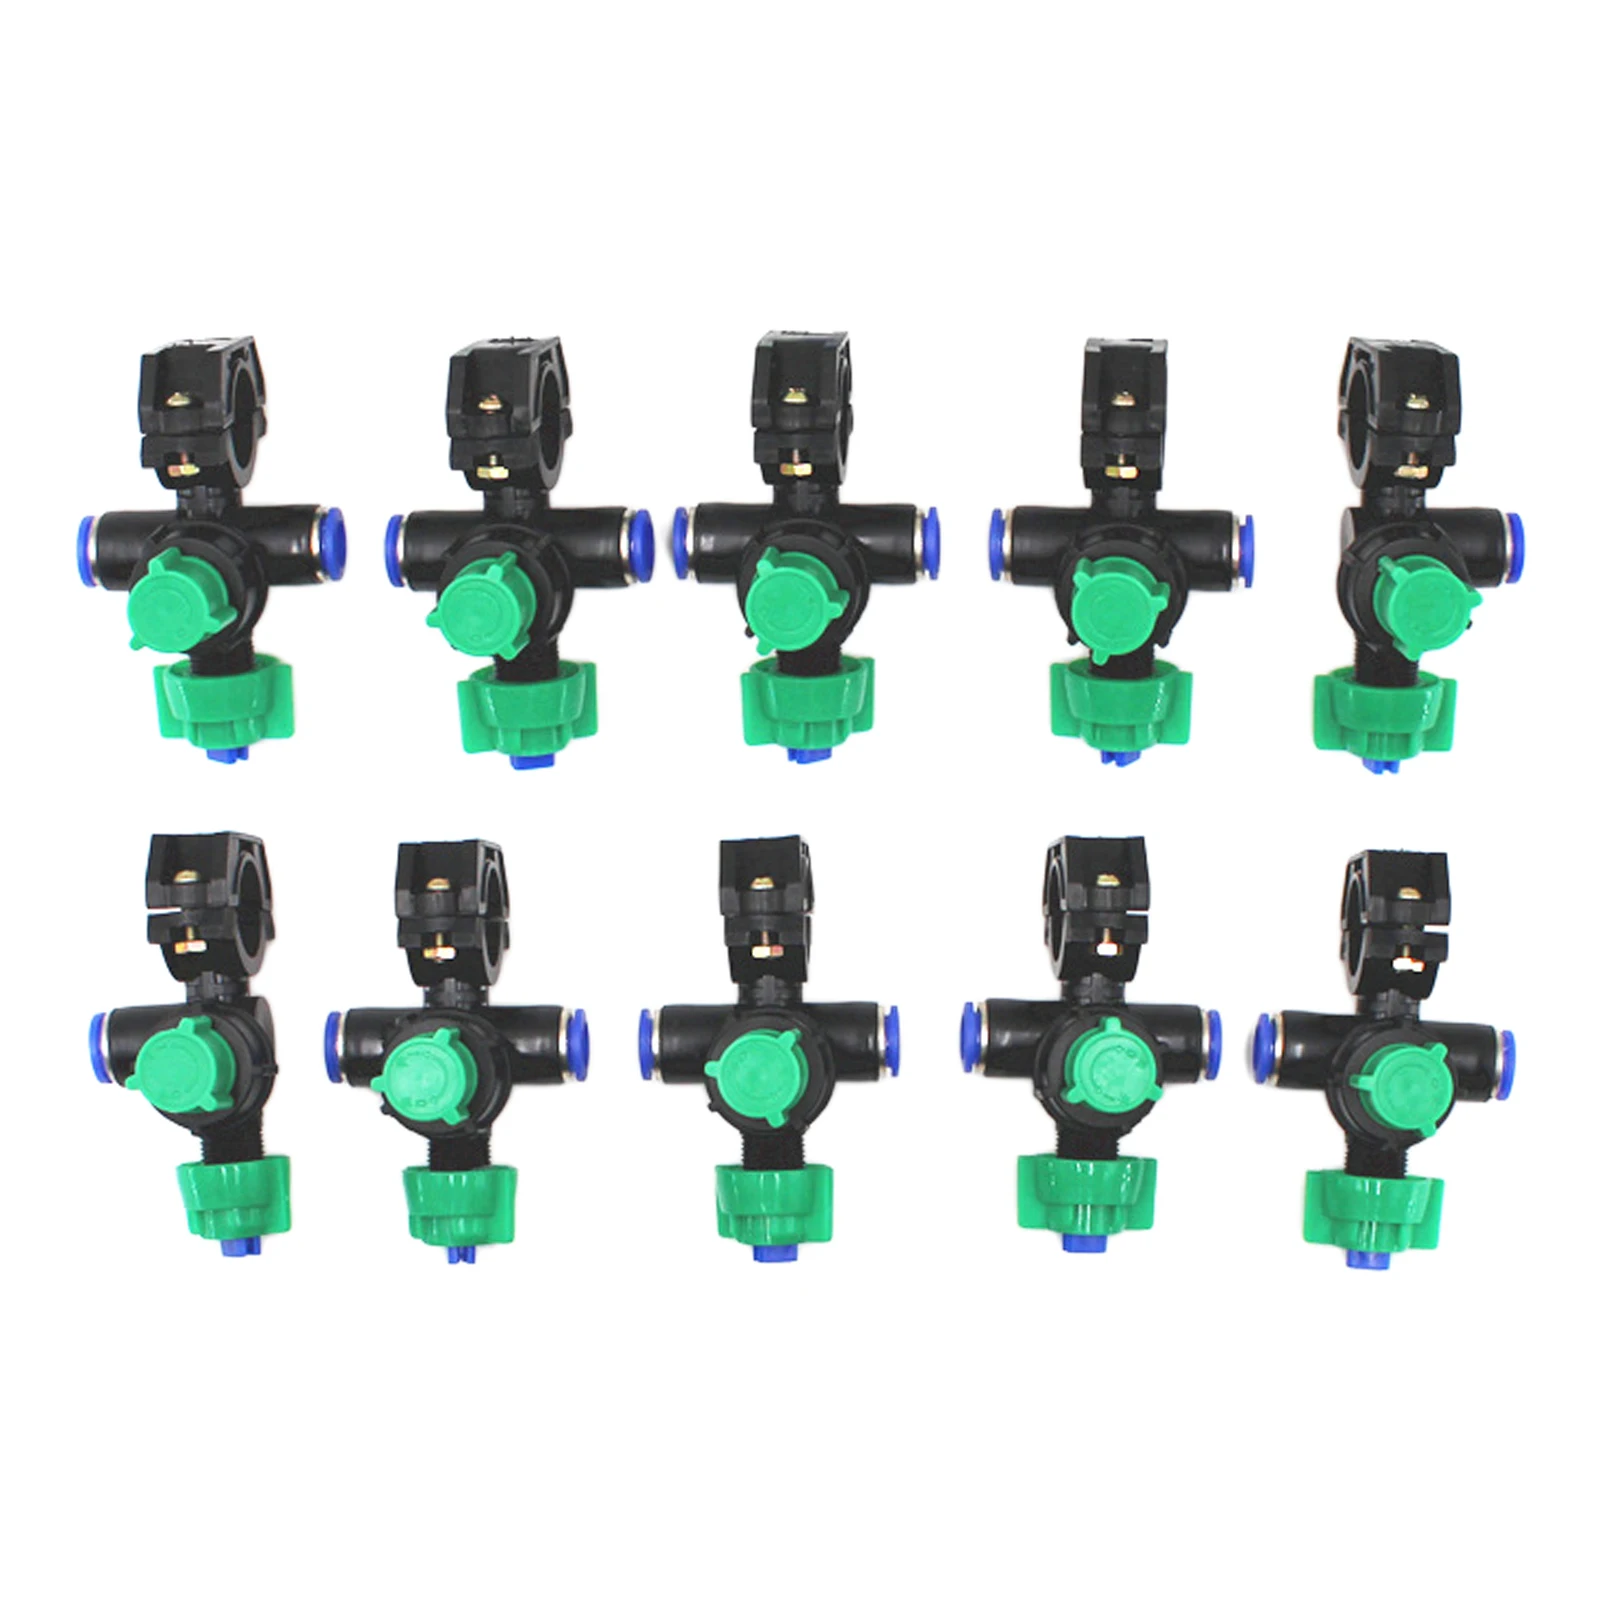 10x Agricultural Spray Nozzles Atomizing Sprayer Nozzle Head Garden Lawn Irrigation  Spraying Sprinkler Watering Tool